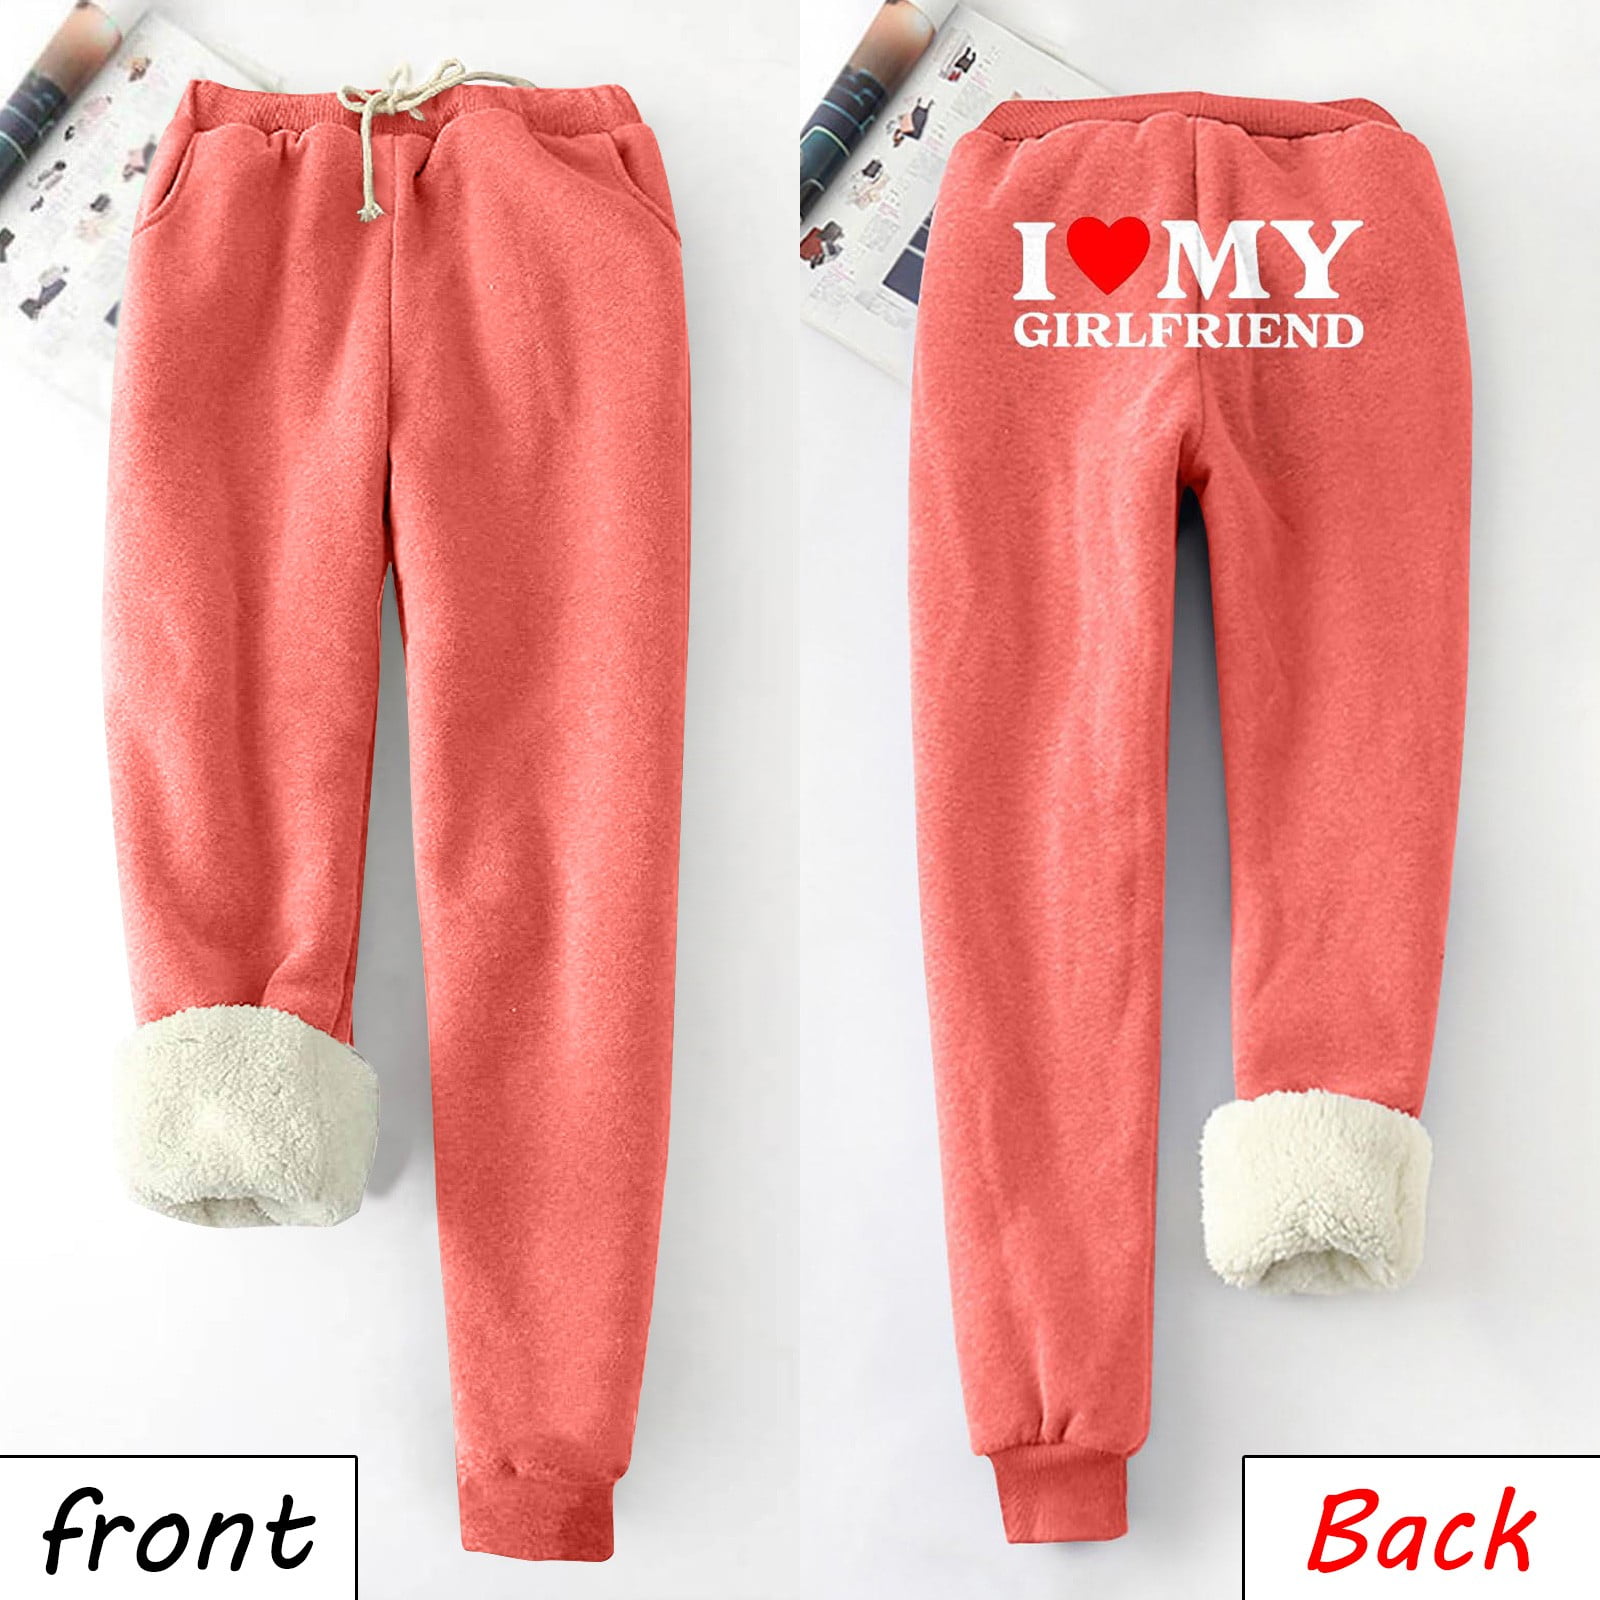 ZQGJB Womens Sweatpants Cotton Joggers with Pockets Cute Letters I